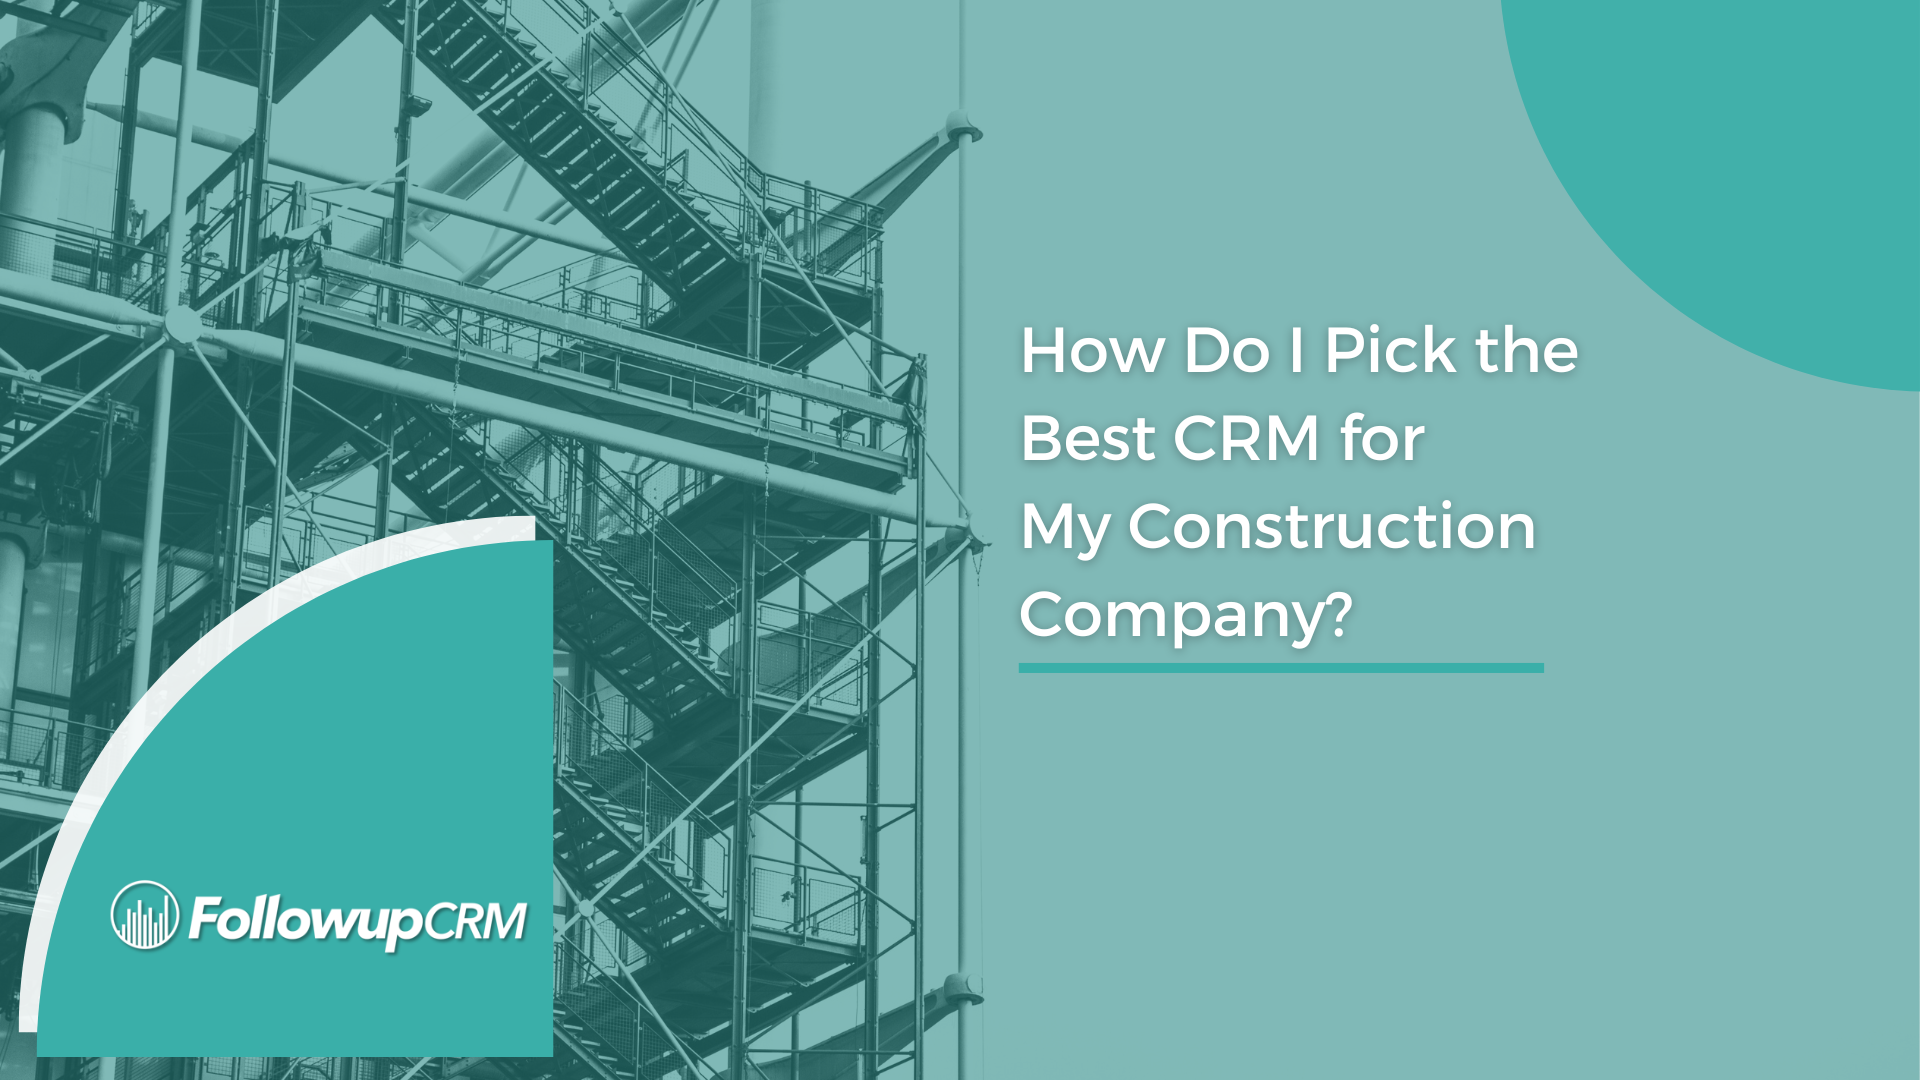 How Do I Pick the Best CRM for My Construction Company?